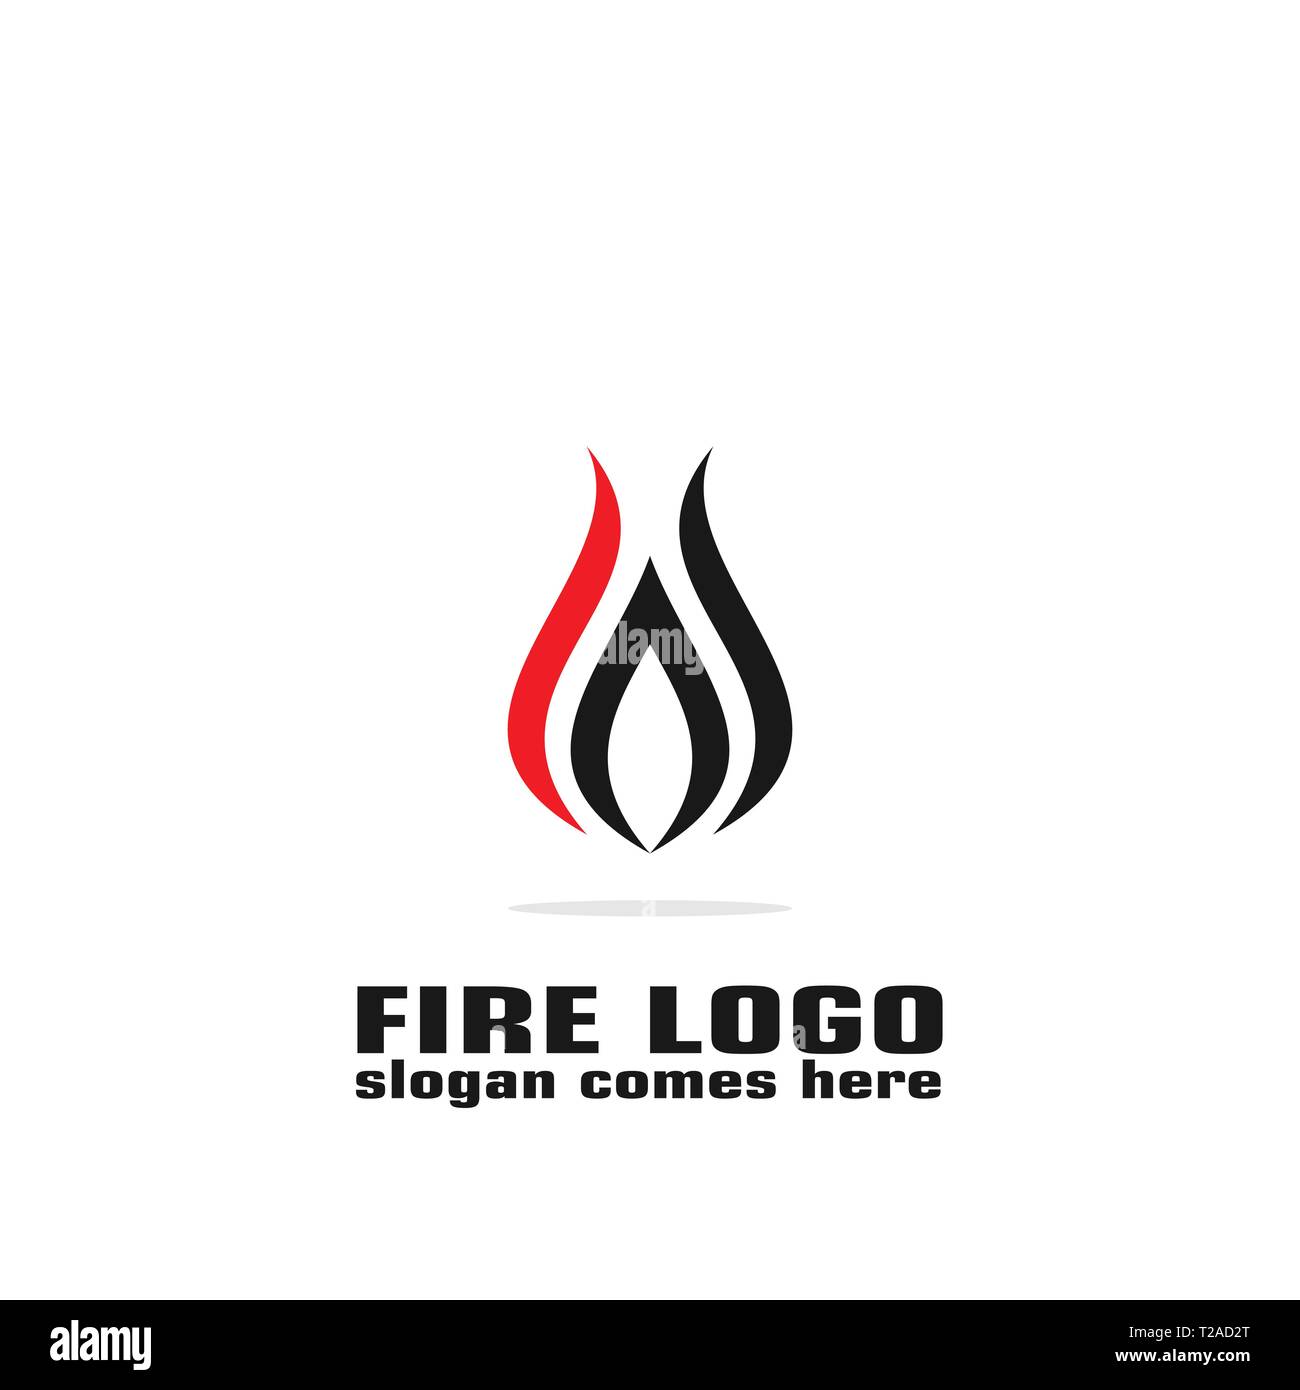 Fire graphic logo template, flame icon, illustration of company logo. Stock Vector